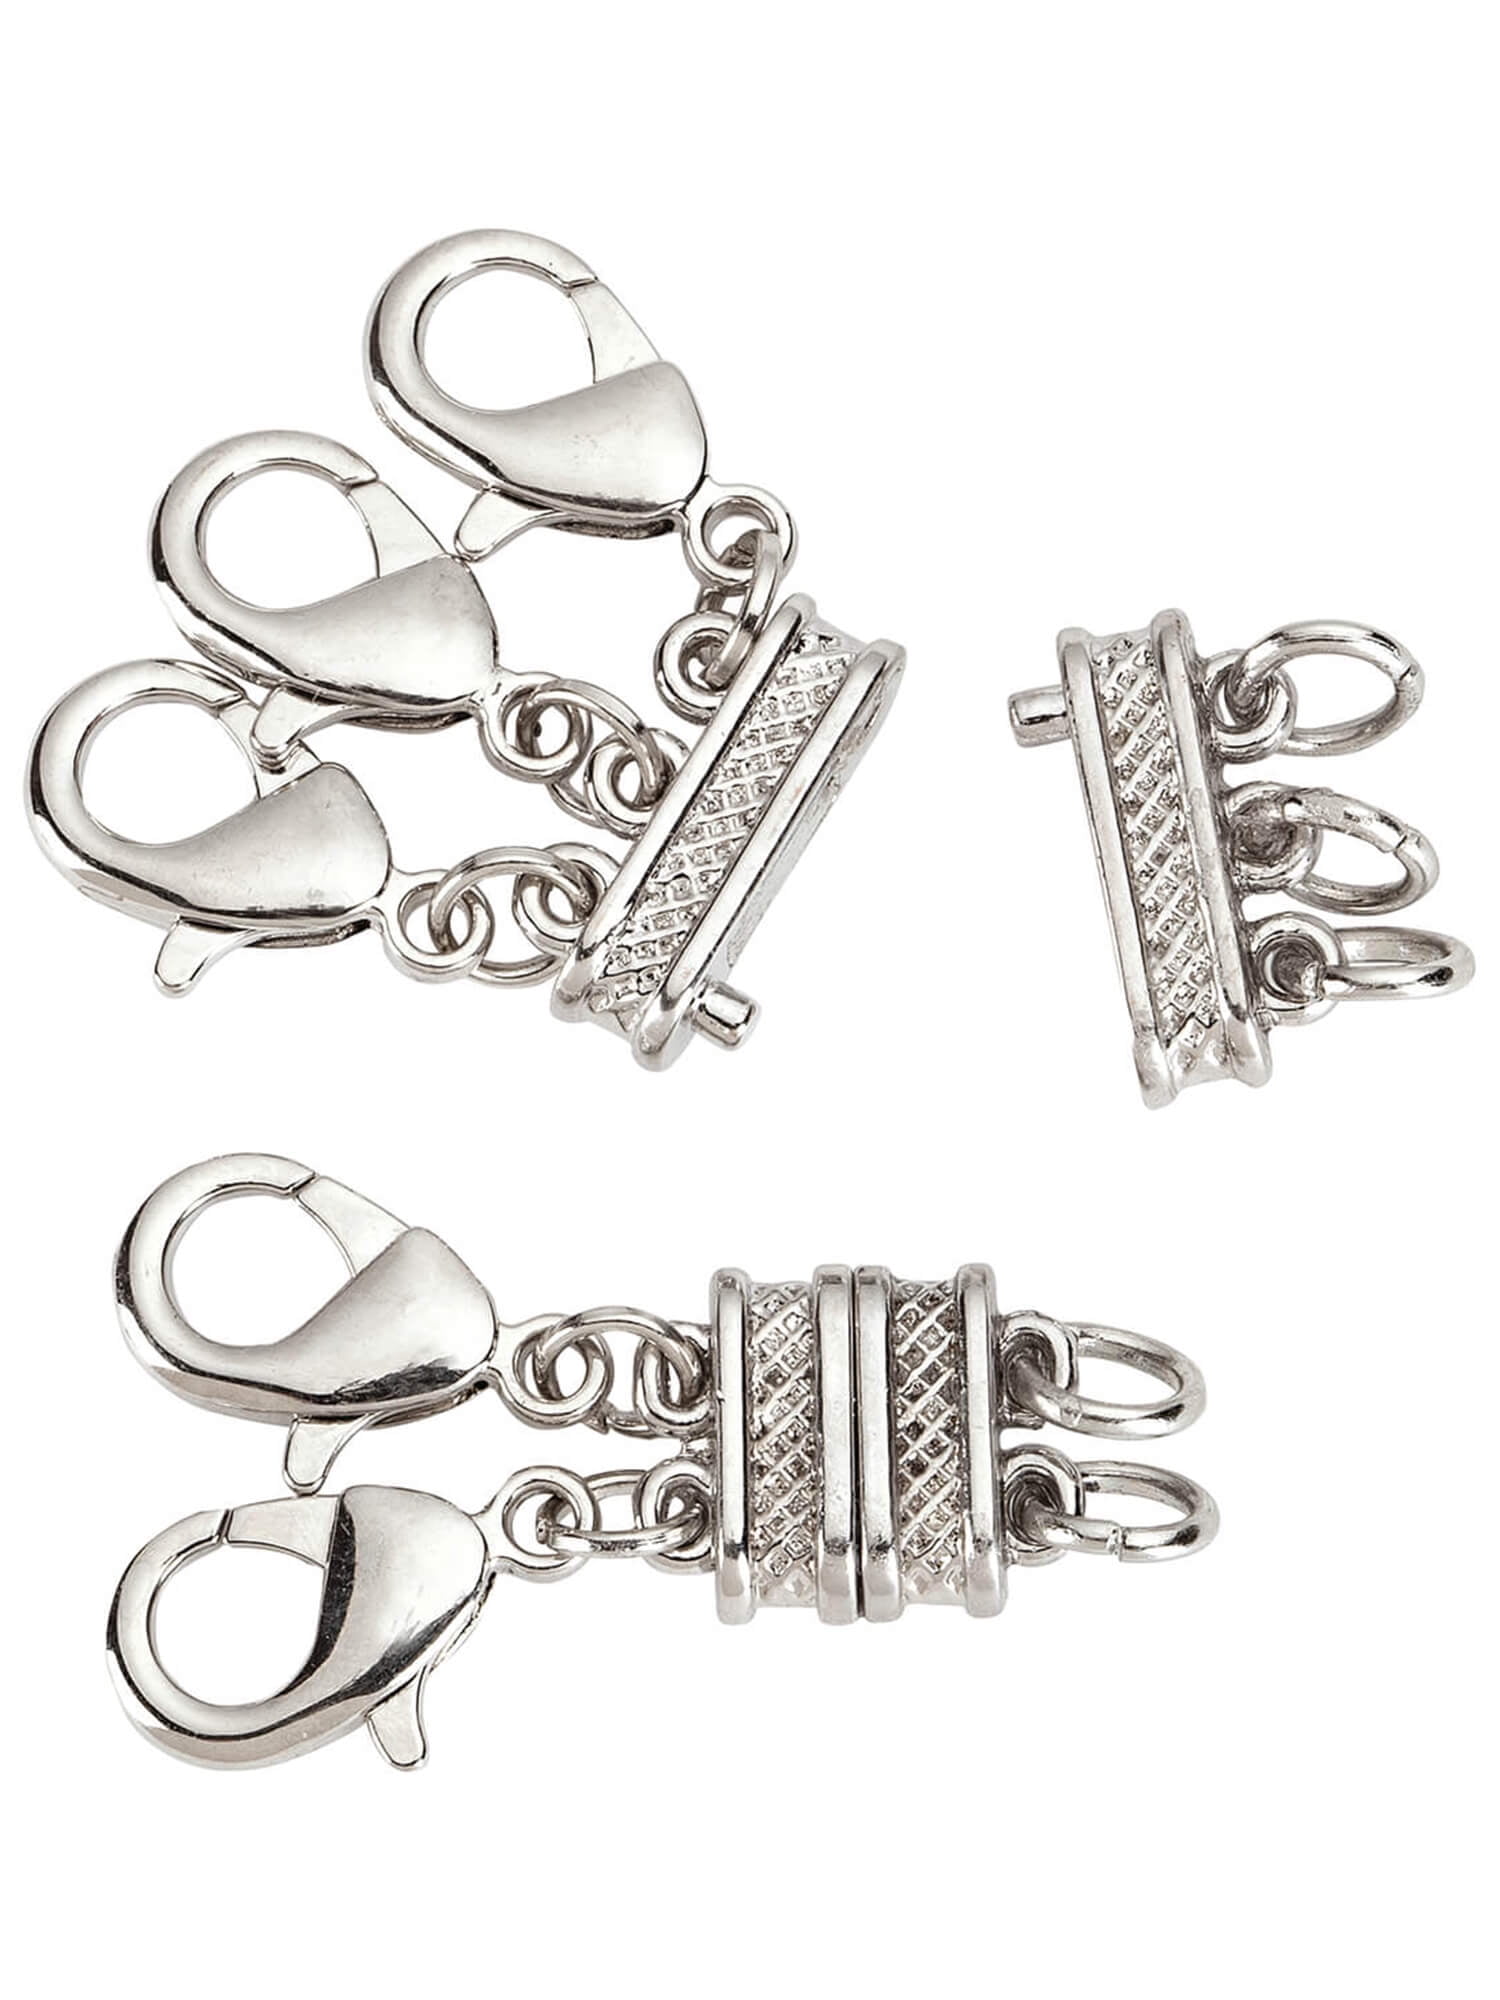  Stosts Layered Necklace Clasps, 2 Pack 2 Strands Jewelry  Spacers Necklace Separator For Layering, Tangle Free Multiple Bracelet Lock  Connectors